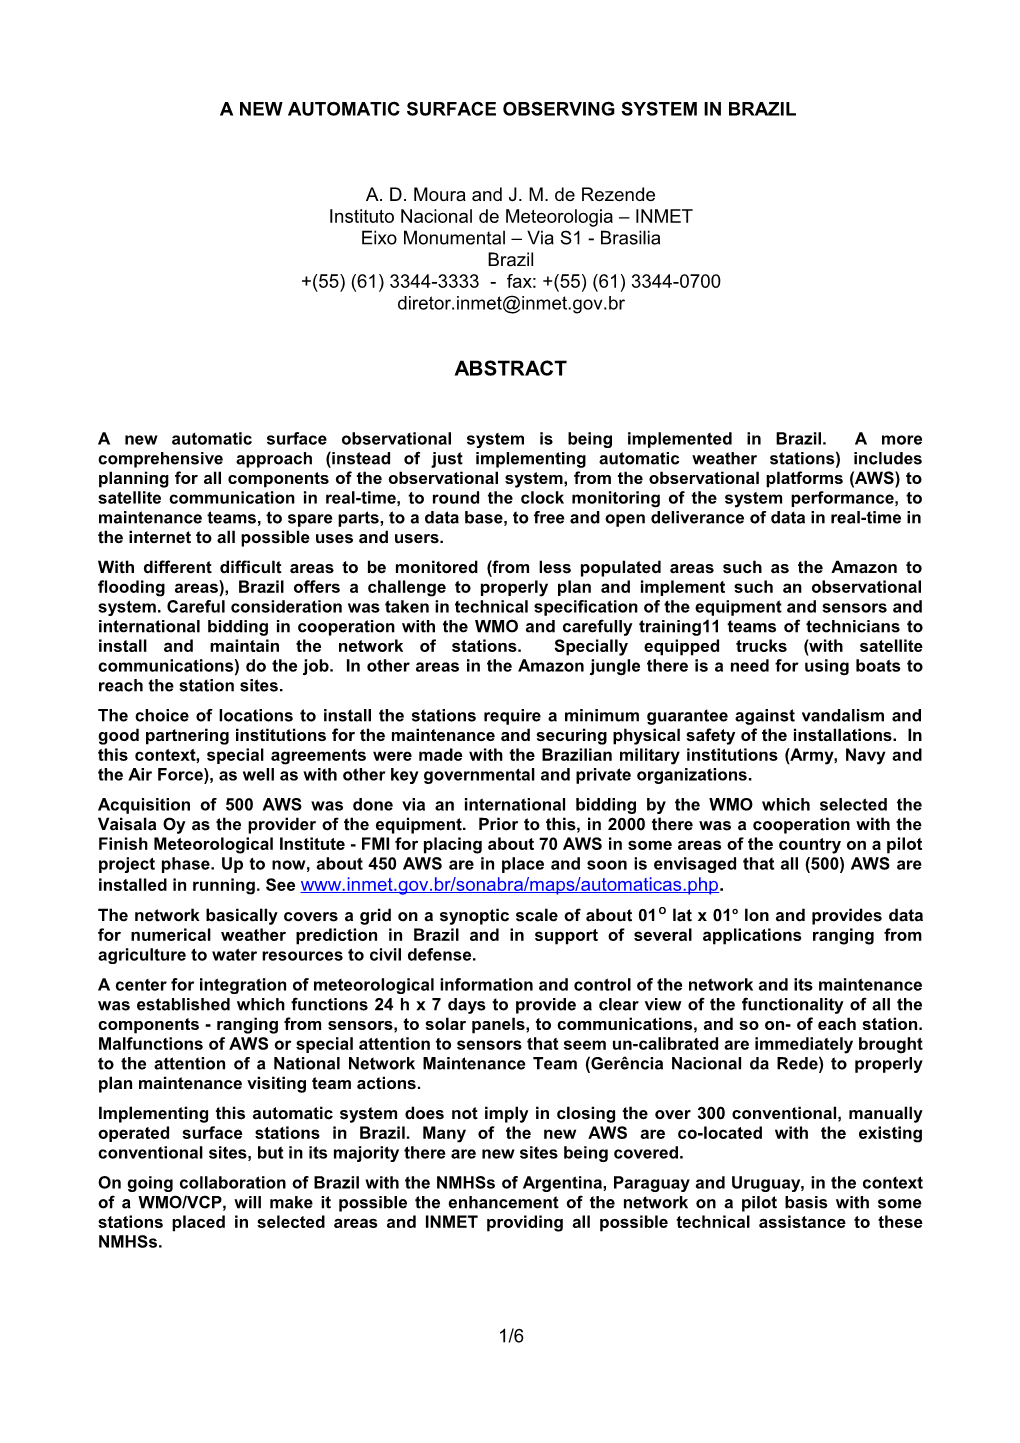 Overview of the Demands for an Automatic Operationa Atmospheric Observing System